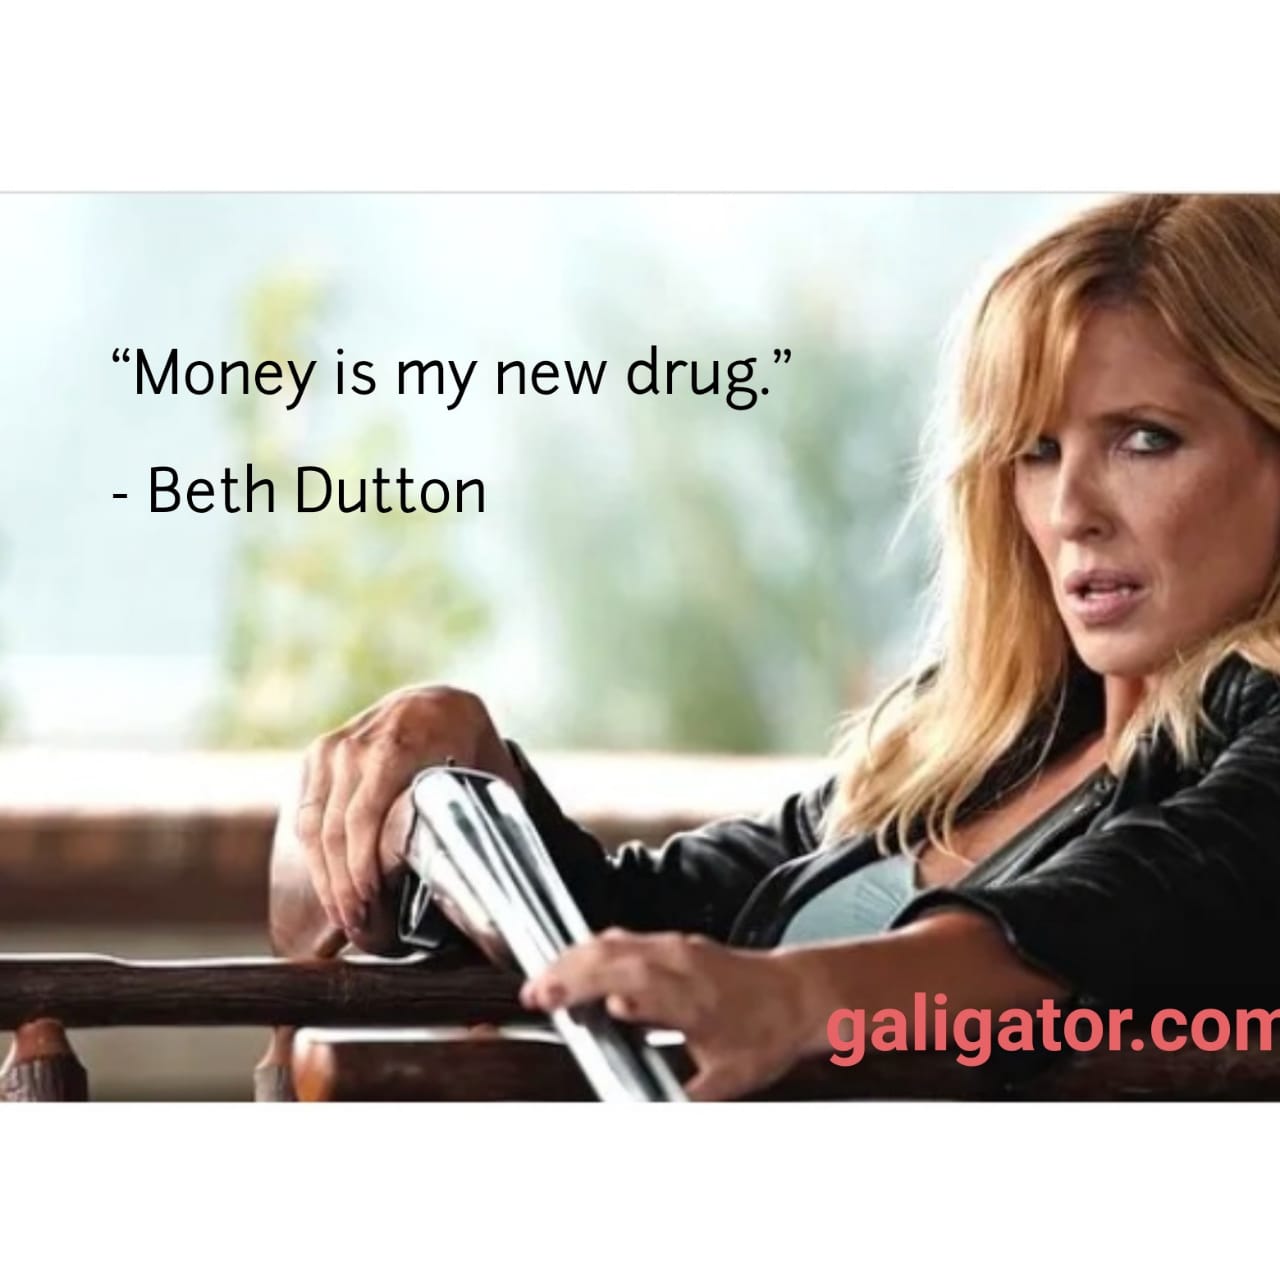 beth dutton quotes, beth dutton quote, best beth dutton quotes, beth dutton quotes meme, beth dutton quote, funny beth dutton quotes, quotes by beth dutton, beth dutton wuotes, beth from yellowstone quotes, inspirational beth dutton quotes , beth dutton quotes season 4, beth dutton quotes from season 4 , beth dutton quotes shirts, beth dutton quotes to rip, beth dutton quoted , beth.dutton quotes, best beth dutton quote, best beth dutton quotes, r i p quotes , rip qoutes, rip quotes, berh dutton , beth durron, beth durton, beth dutto, beth dutton , beth dutyon , beth yellowstone ,